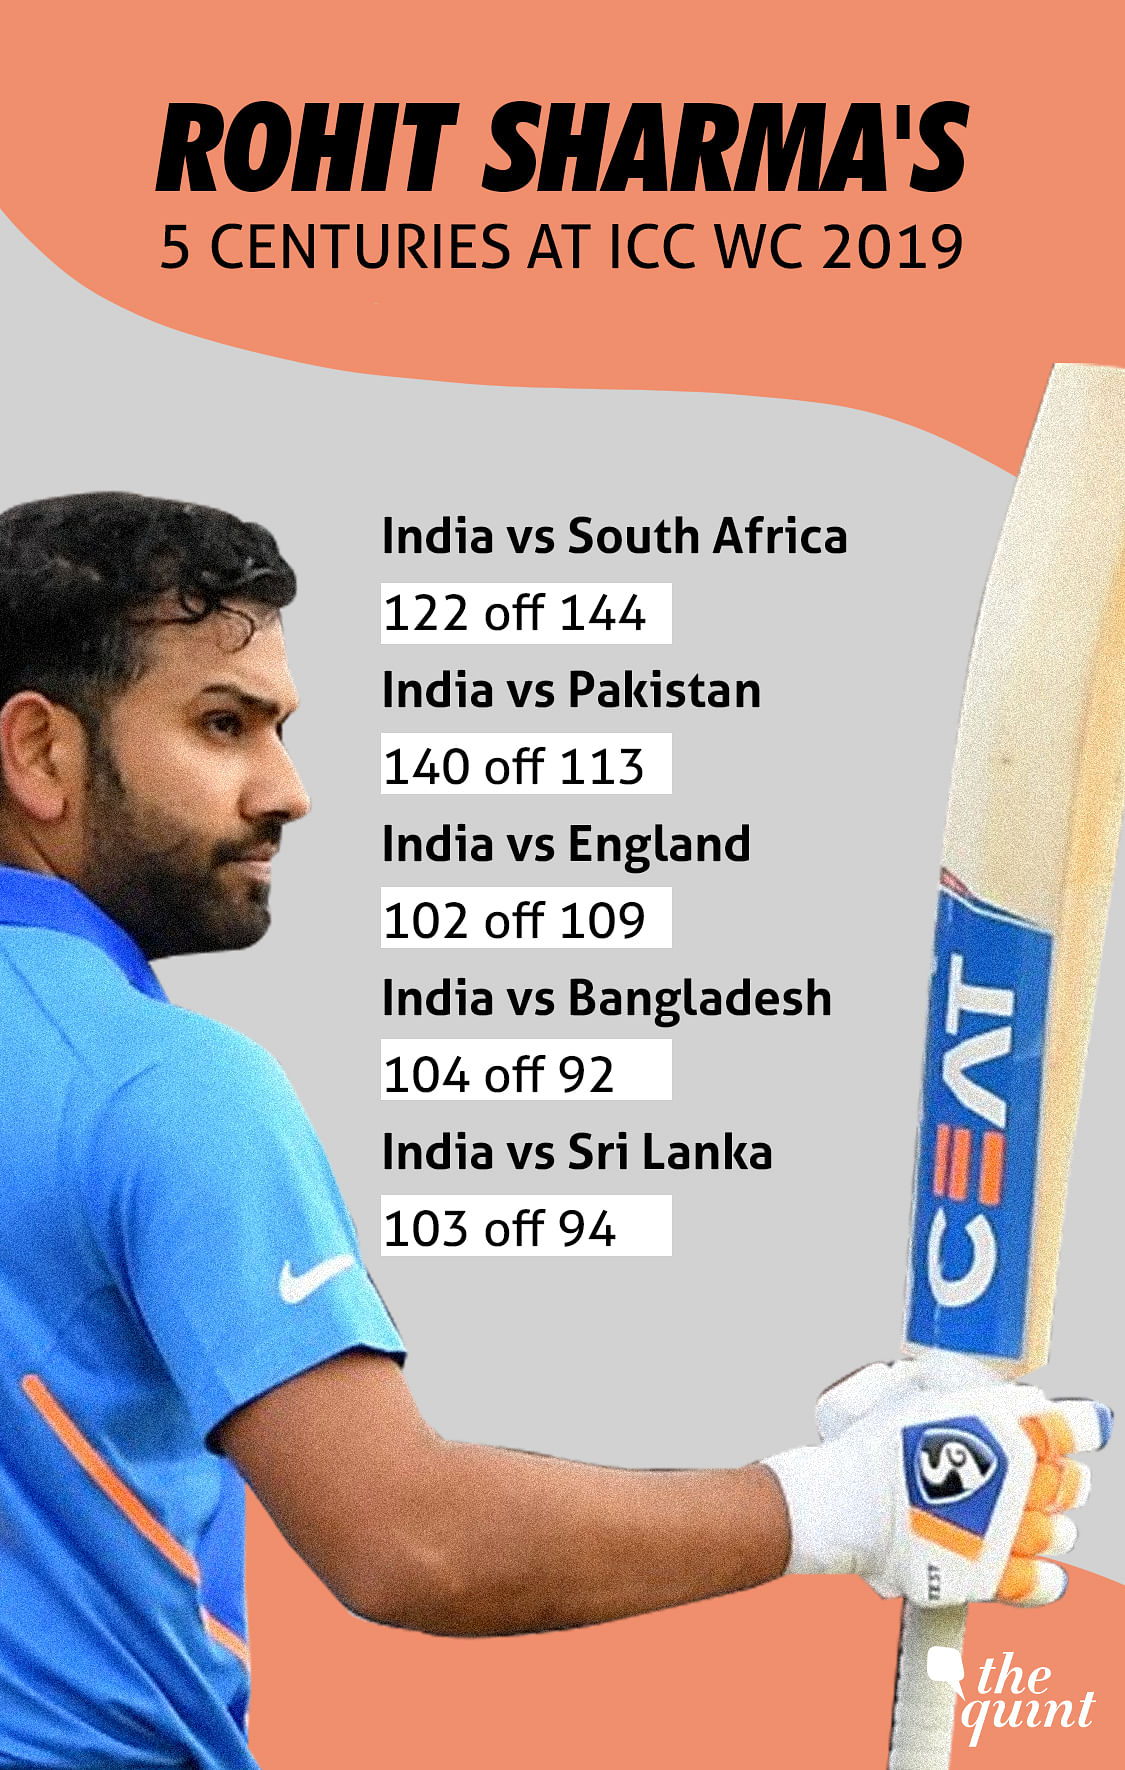 Rohit Sharma aggregated 2,442 runs from 47 international innings at an impressive average of 53.08 in 2019.